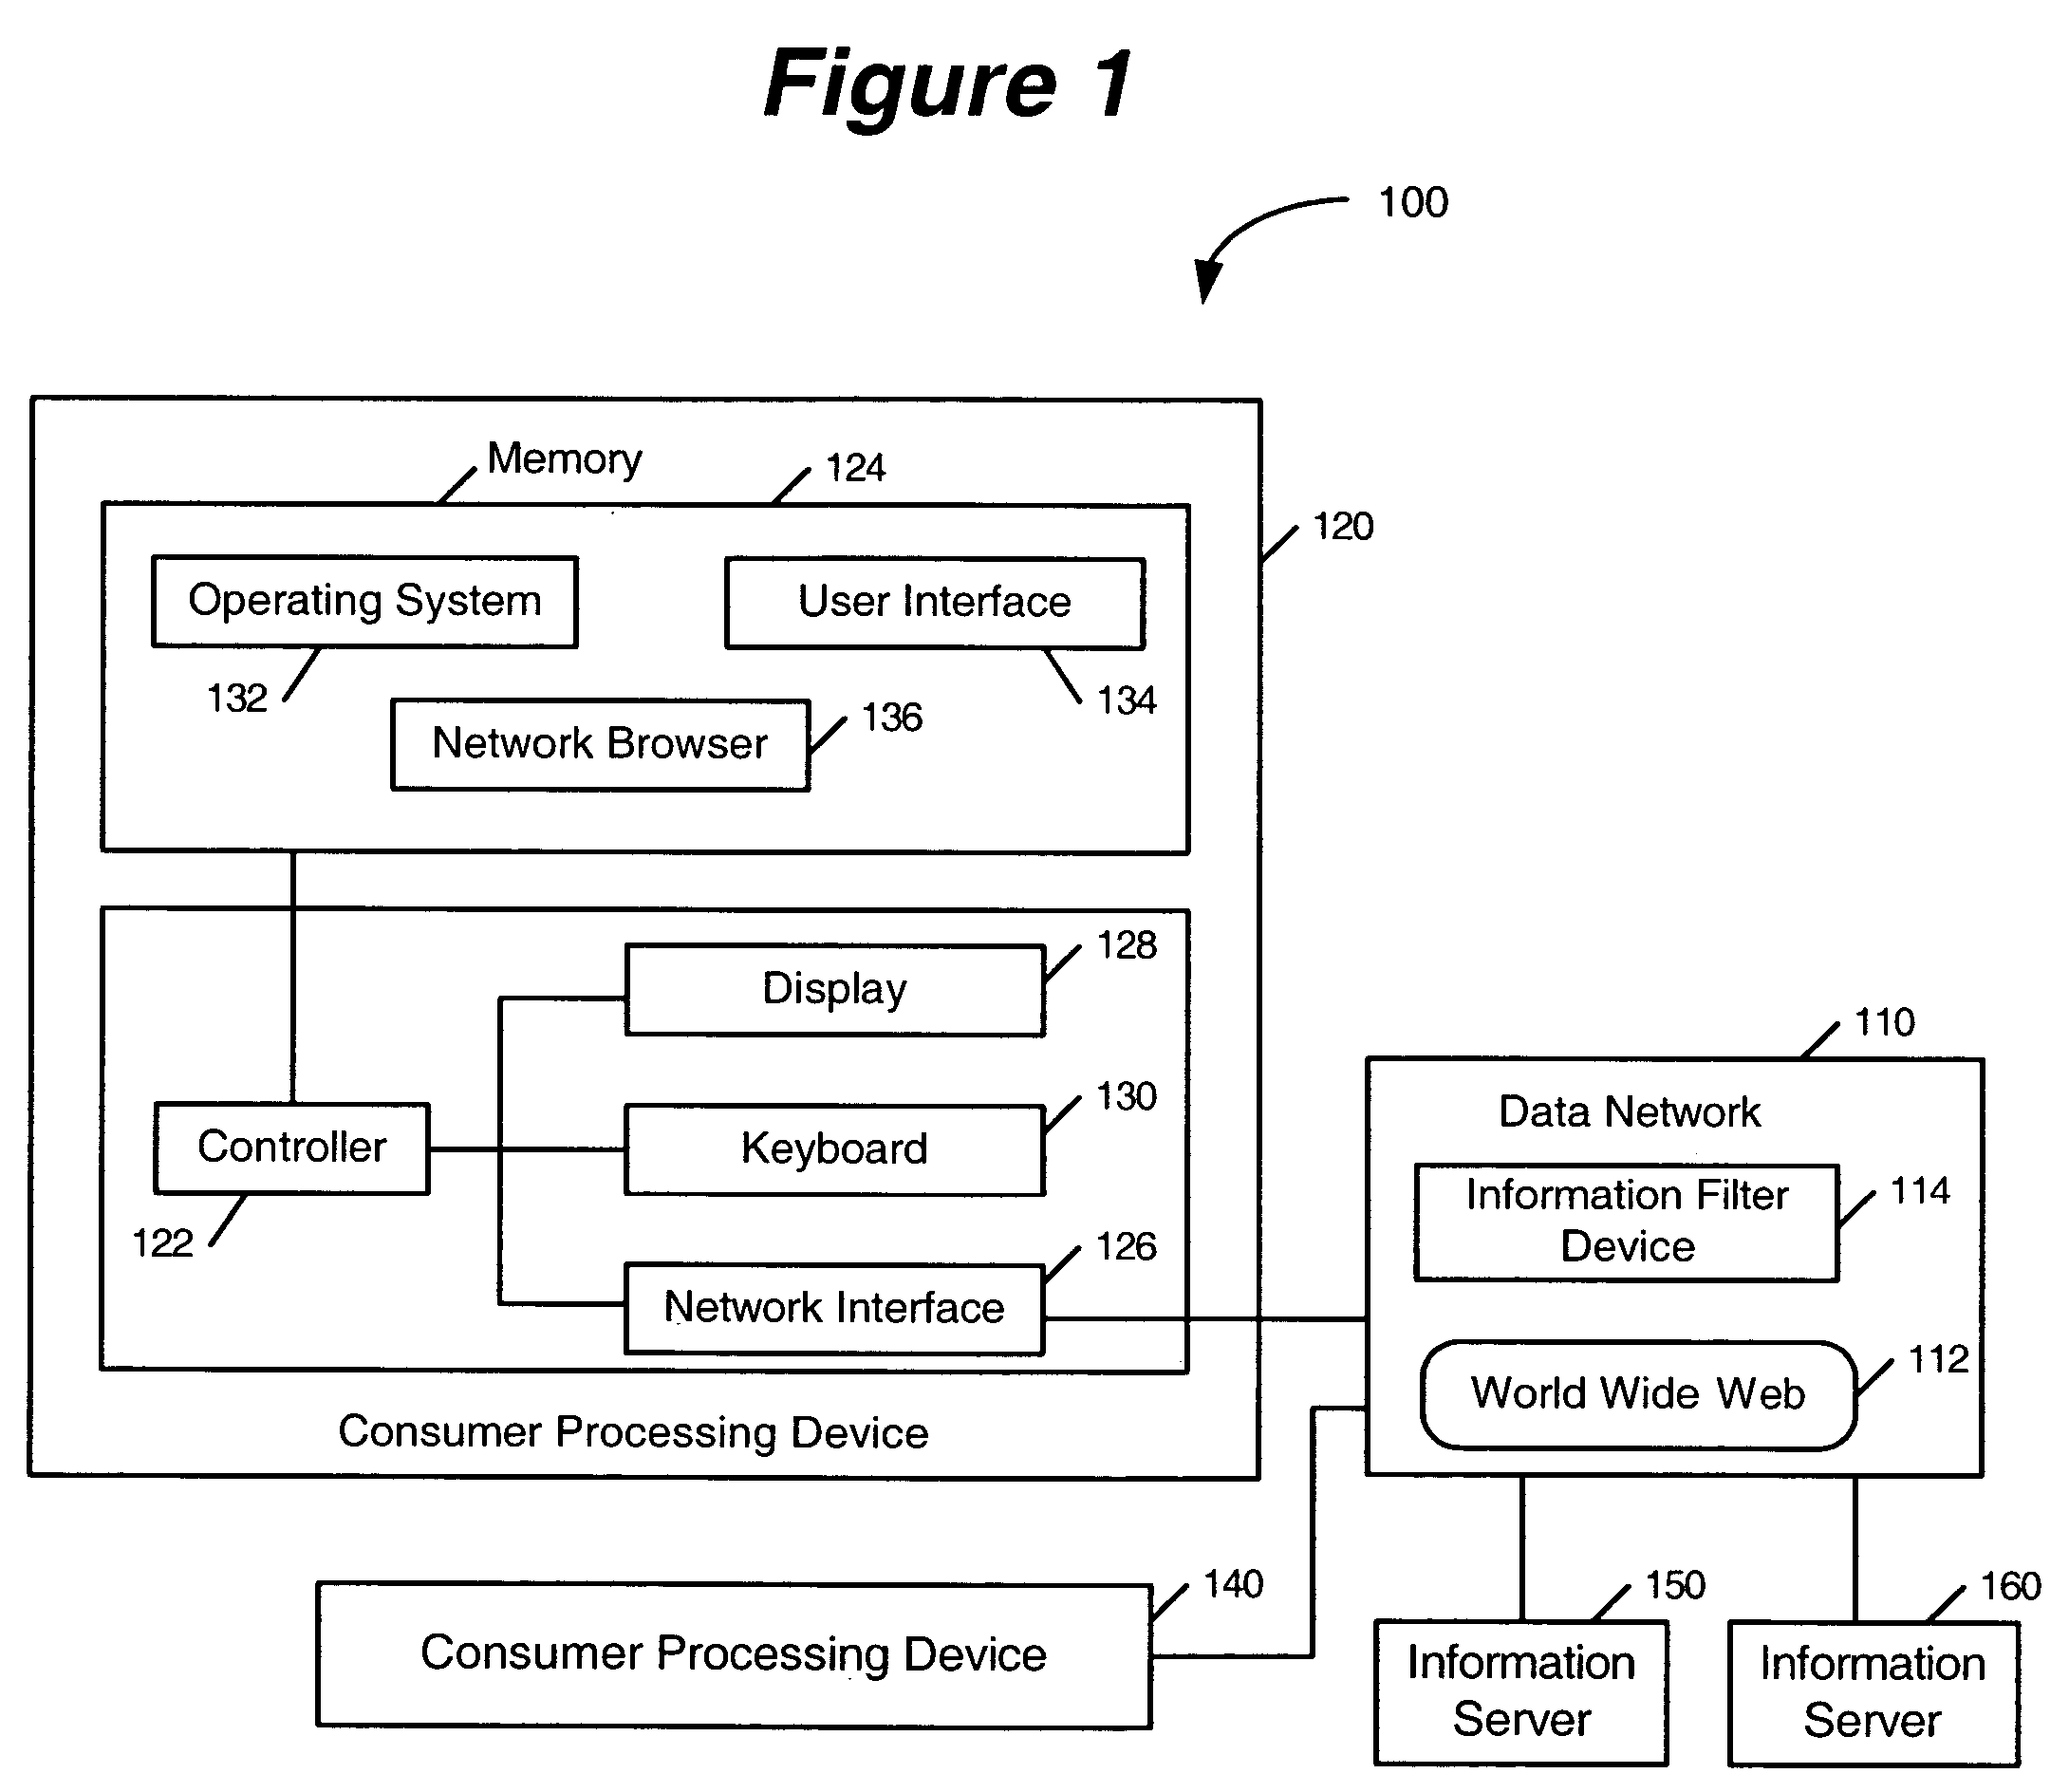 Filtering information at a data network based on filter rules associated with consumer processing devices